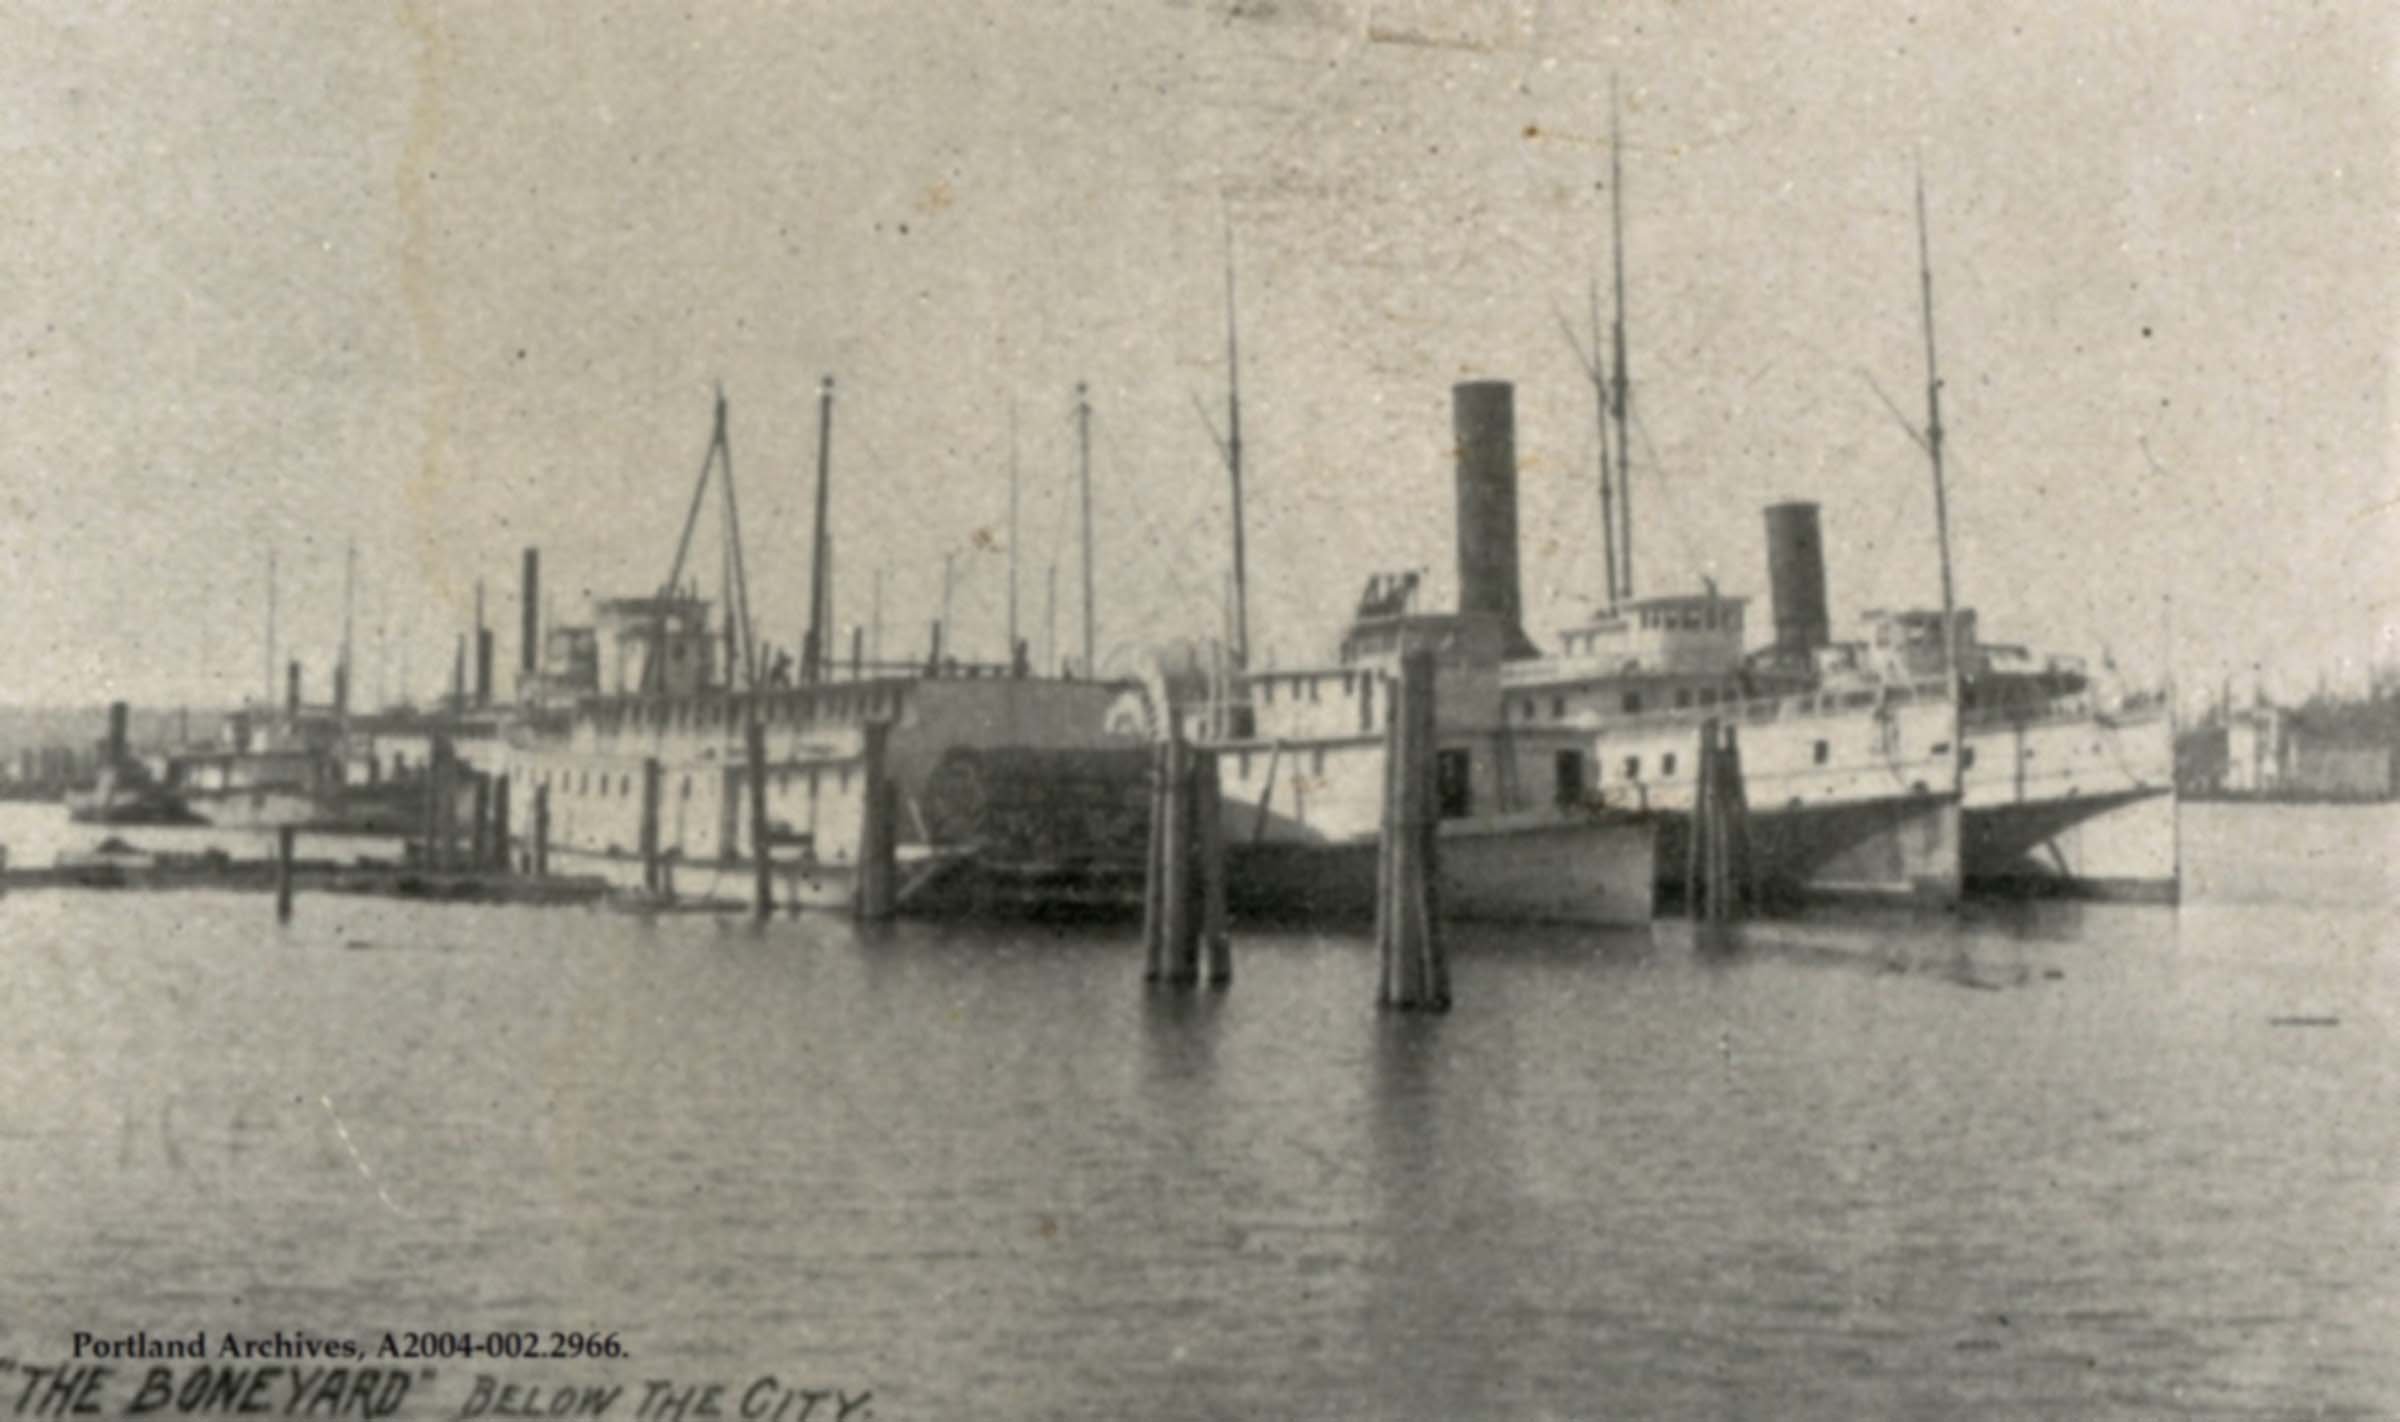 City Auditor - Archives _ Records Management - Auditor s Historical Records - A2004-002.2966   View of boats on the Willamette River 1892.JPG